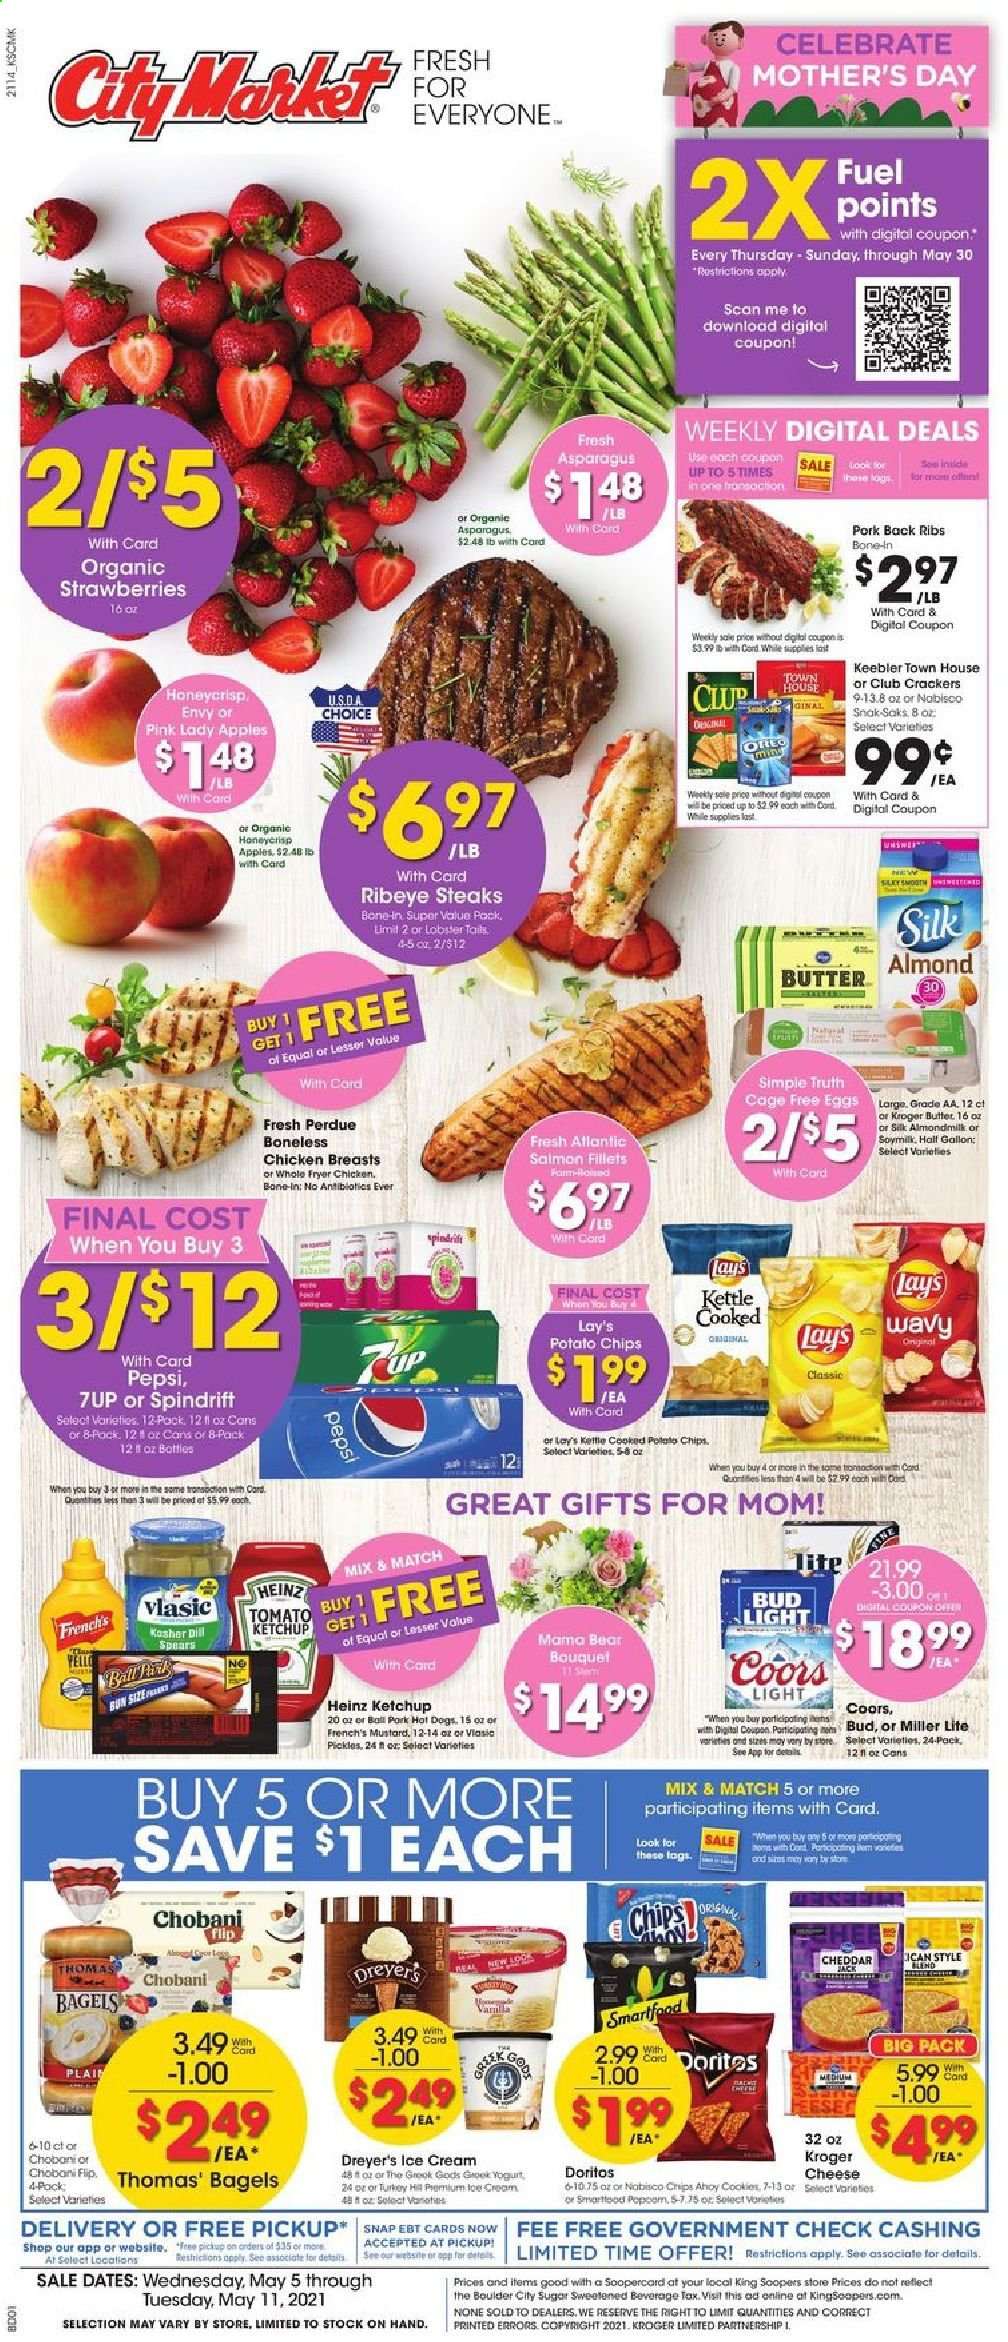 thumbnail - City Market Flyer - 05/05/2021 - 05/11/2021 - Sales products - bagels, asparagus, apples, strawberries, Pink Lady, lobster, lobster tail, hot dog, Perdue®, cheese, Oreo, Chobani, almond milk, soy milk, eggs, cage free eggs, almond butter, ice cream, cookies, crackers, Keebler, Doritos, potato chips, chips, Lay’s, Smartfood, Heinz, mustard, ketchup, Pepsi, 7UP, Spindrift, L'Or, beer, Miller Lite, Coors, Bud Light, chicken breasts, beef meat, steak, ribeye steak, pork meat, pork ribs, pork back ribs, deep fryer, bouquet. Page 1.